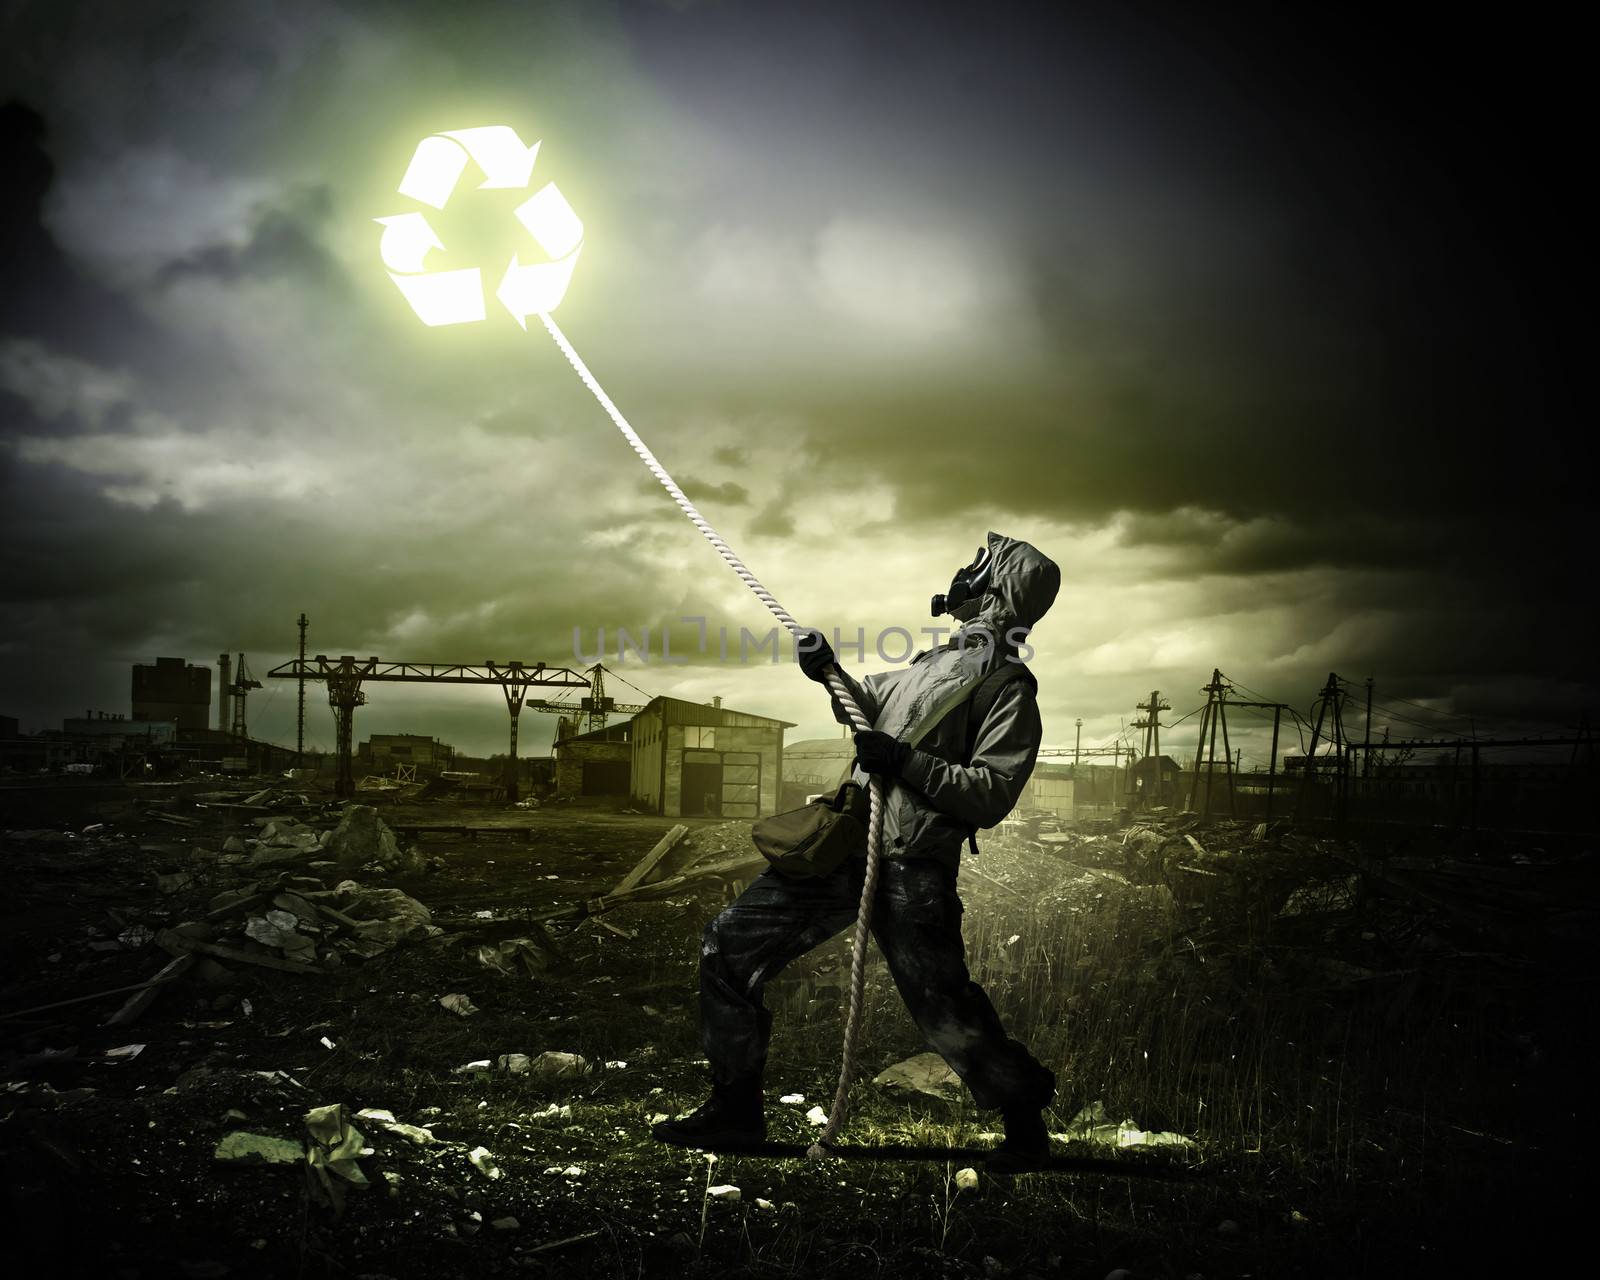 Stalker against nuclear background. Disaster and pollution. Recycle concept